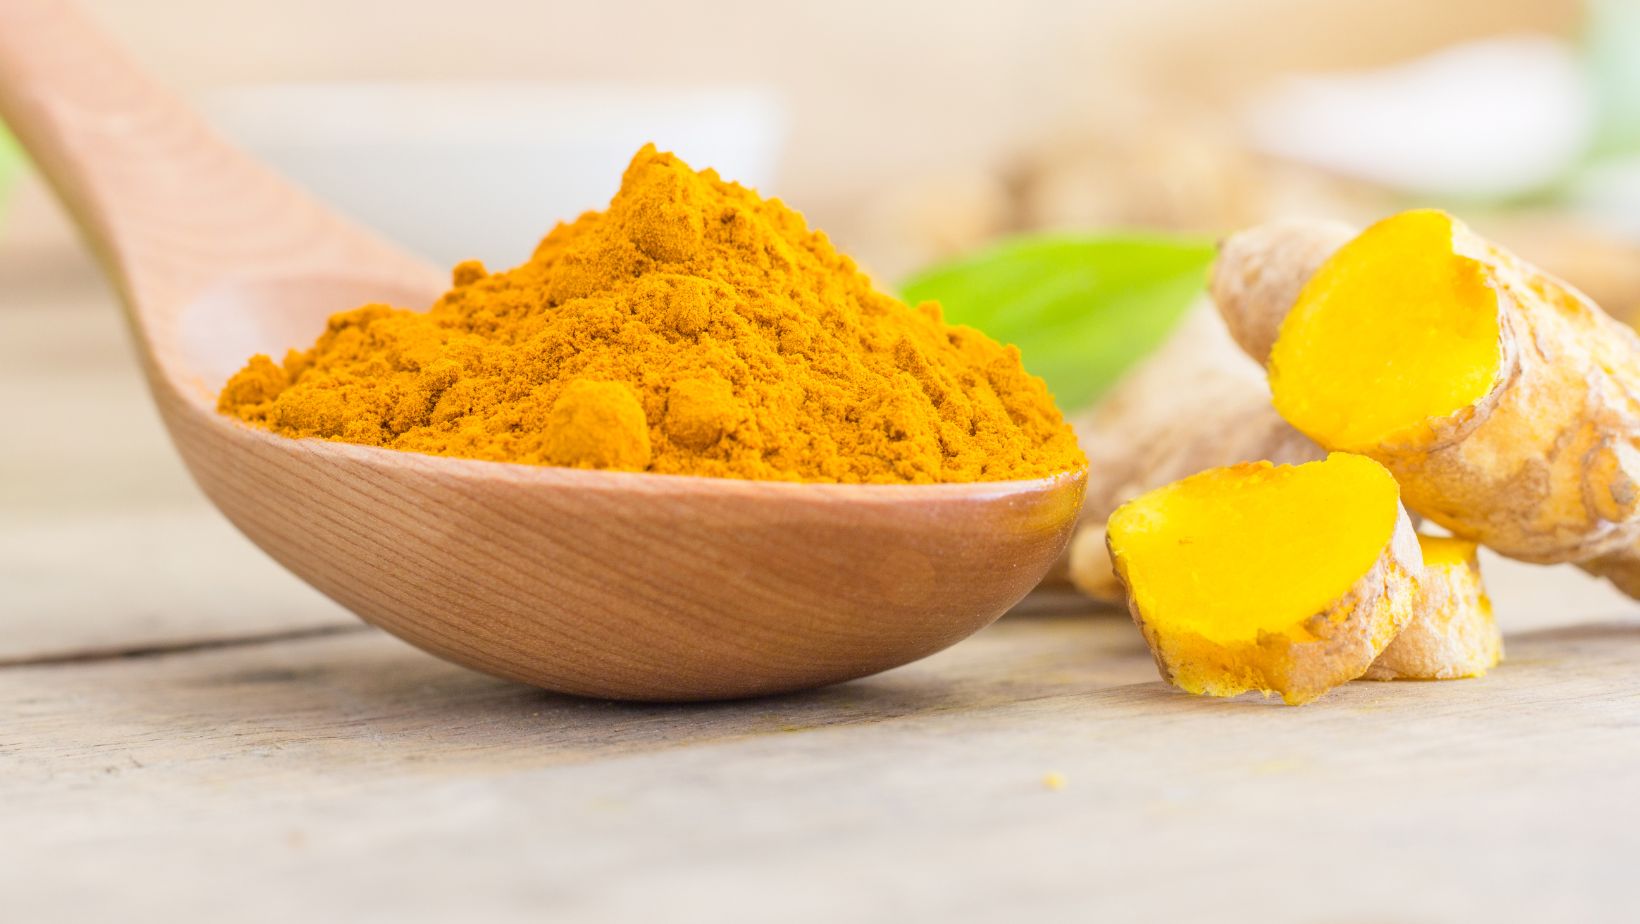 Does Too Much Turmeric Have Side Effects?